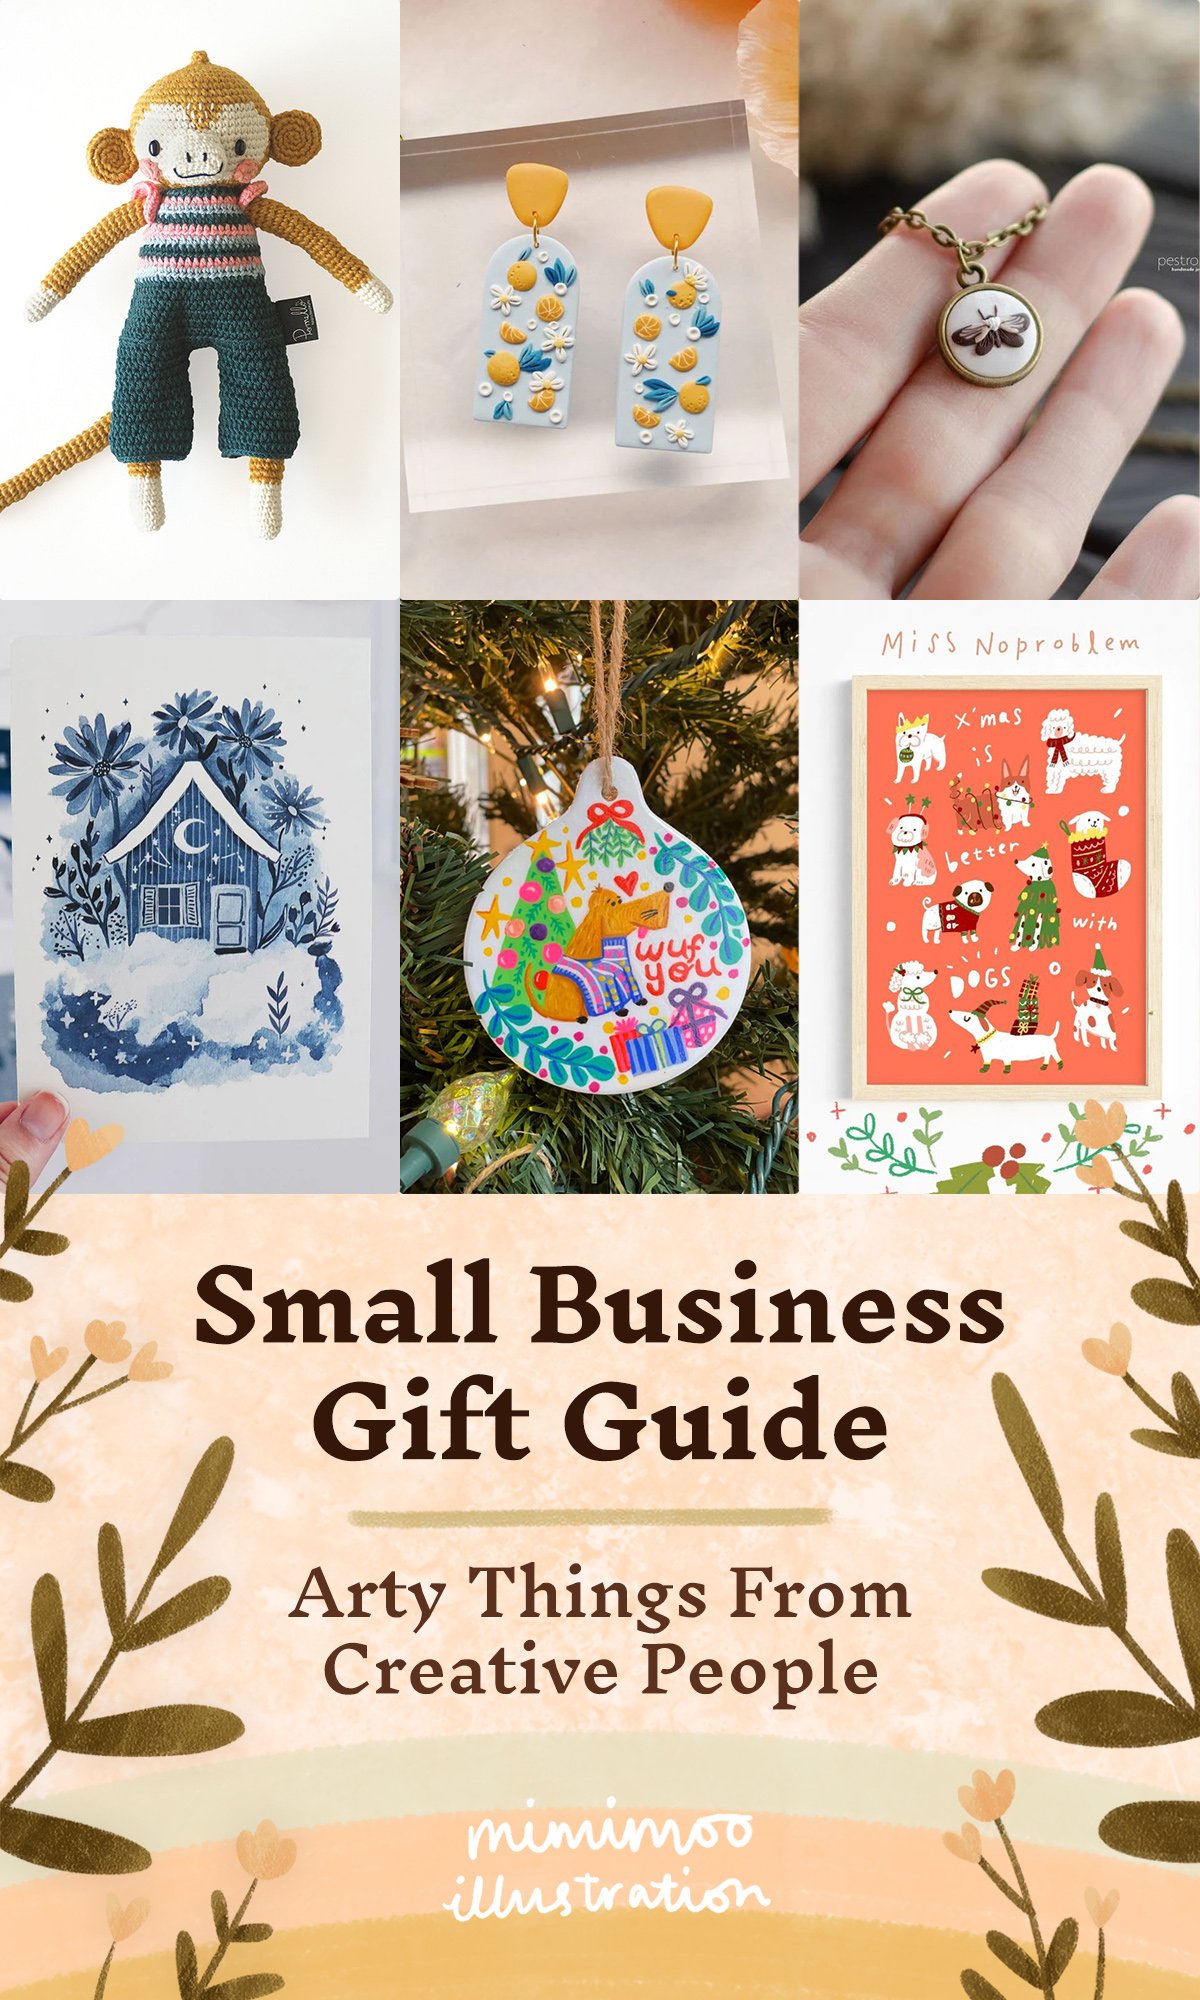 2019 Gift Guide: Gift Ideas for Creatives